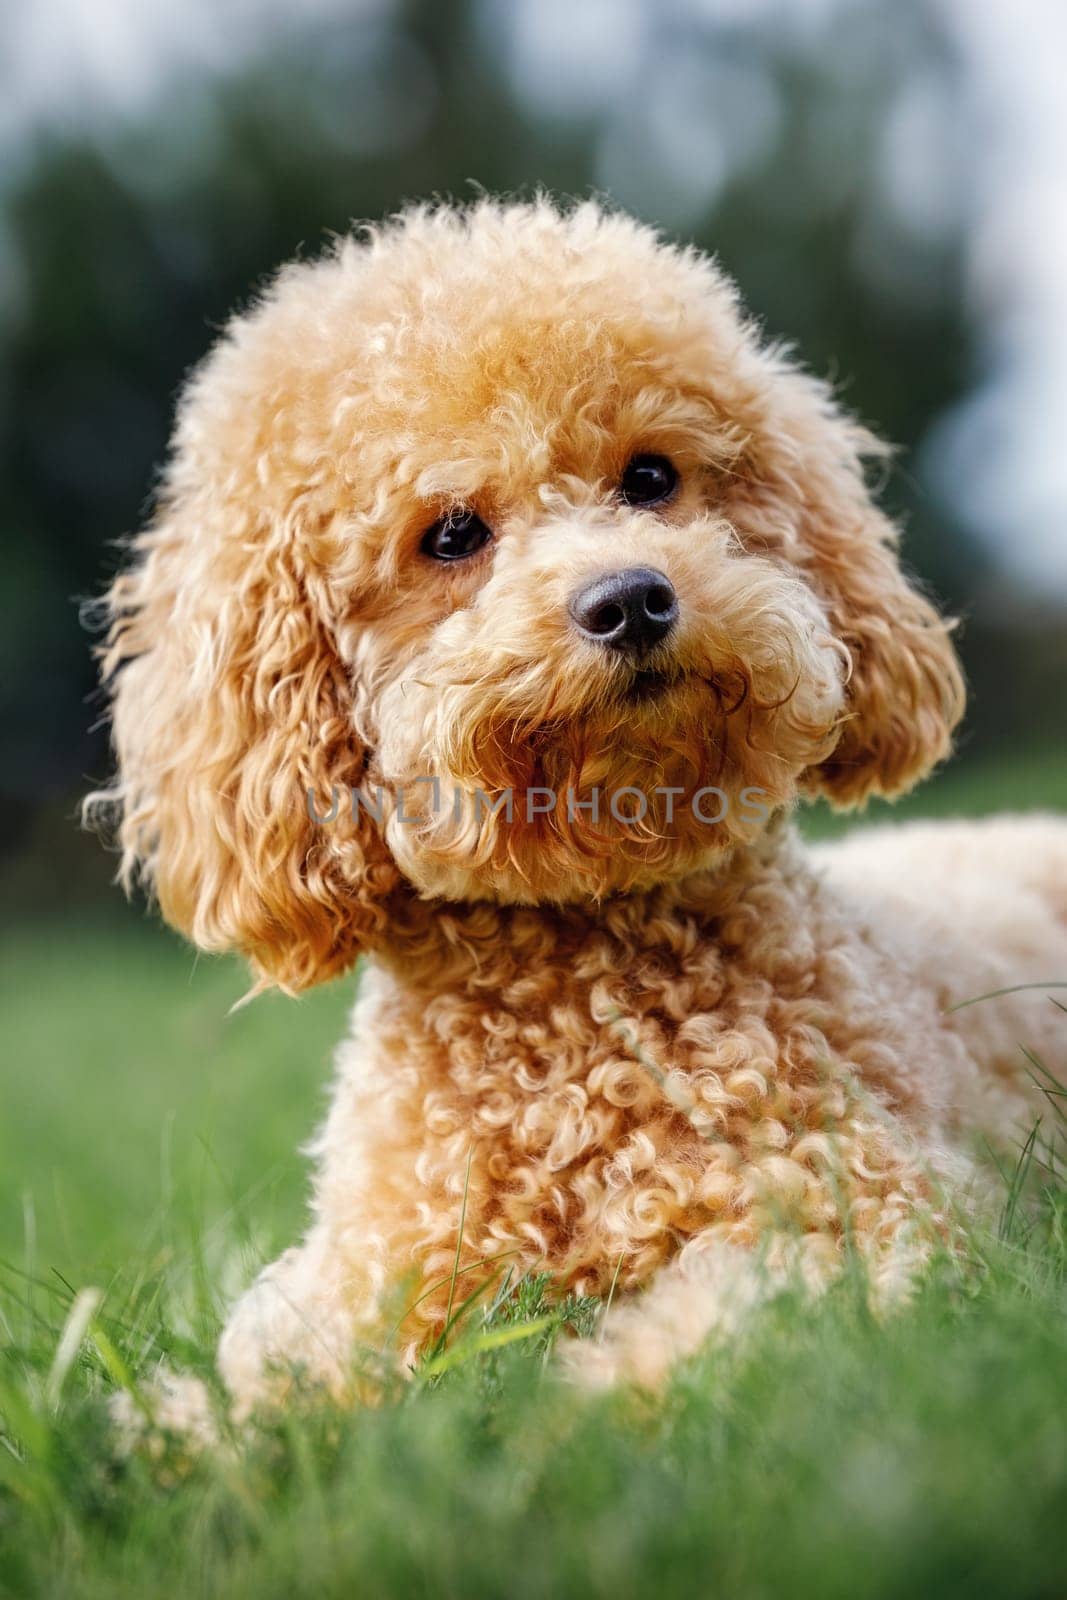 Cute brown dog breed of toy poodle lie on the lawn and looks to photo camera and poses. Curly puppy on a green lawn. Vertical photo.